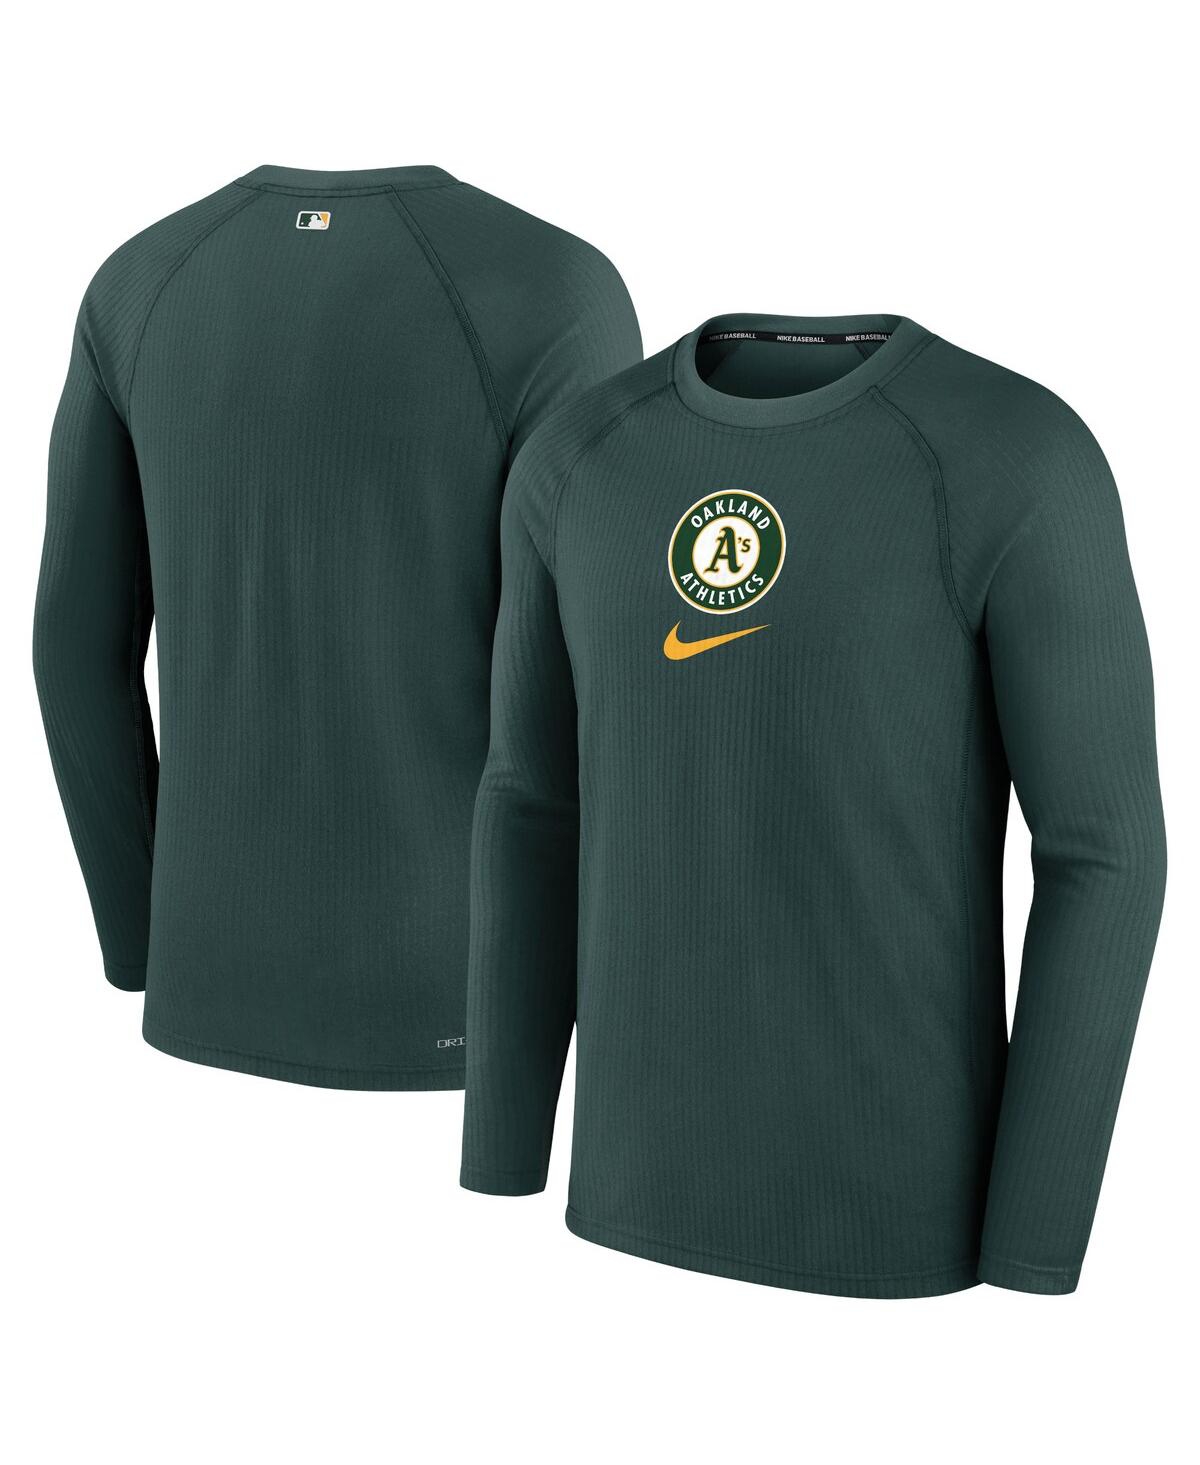 Nike Men's  Green Oakland Athletics Authentic Collection Game Raglan Performance Long Sleeve T-shirt